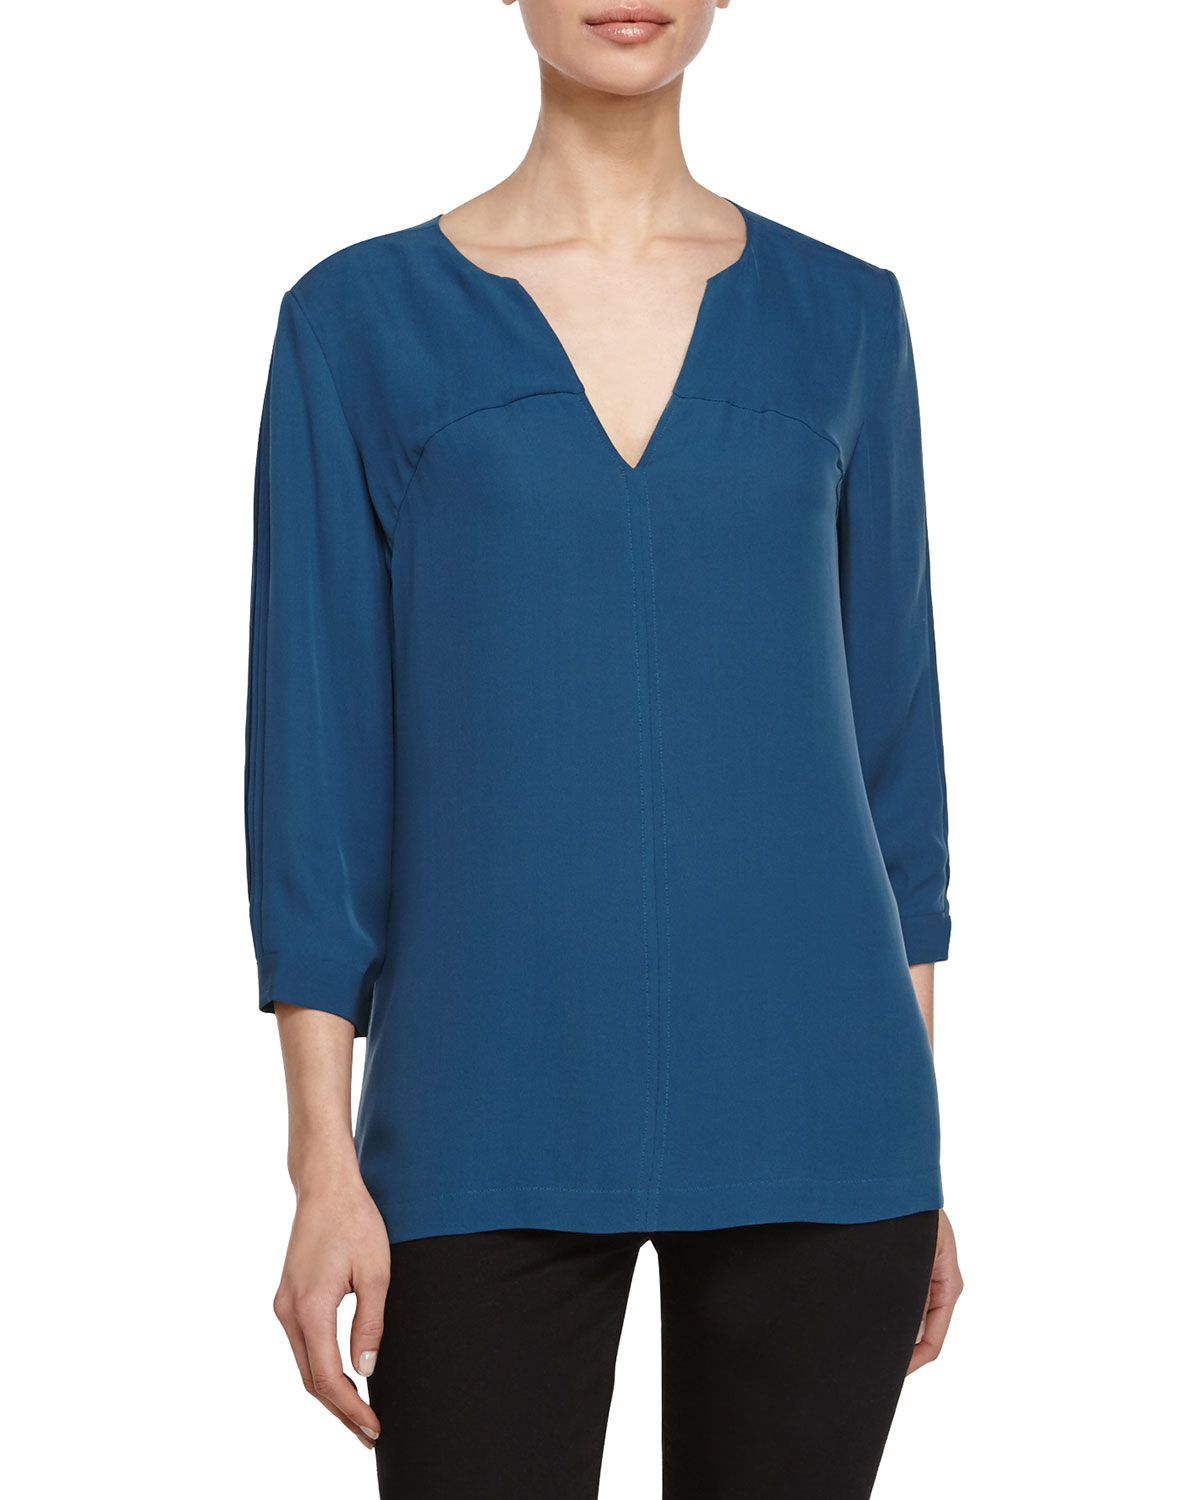 Lyst - Halston Pleated Elbow-Sleeve Blouse in Blue